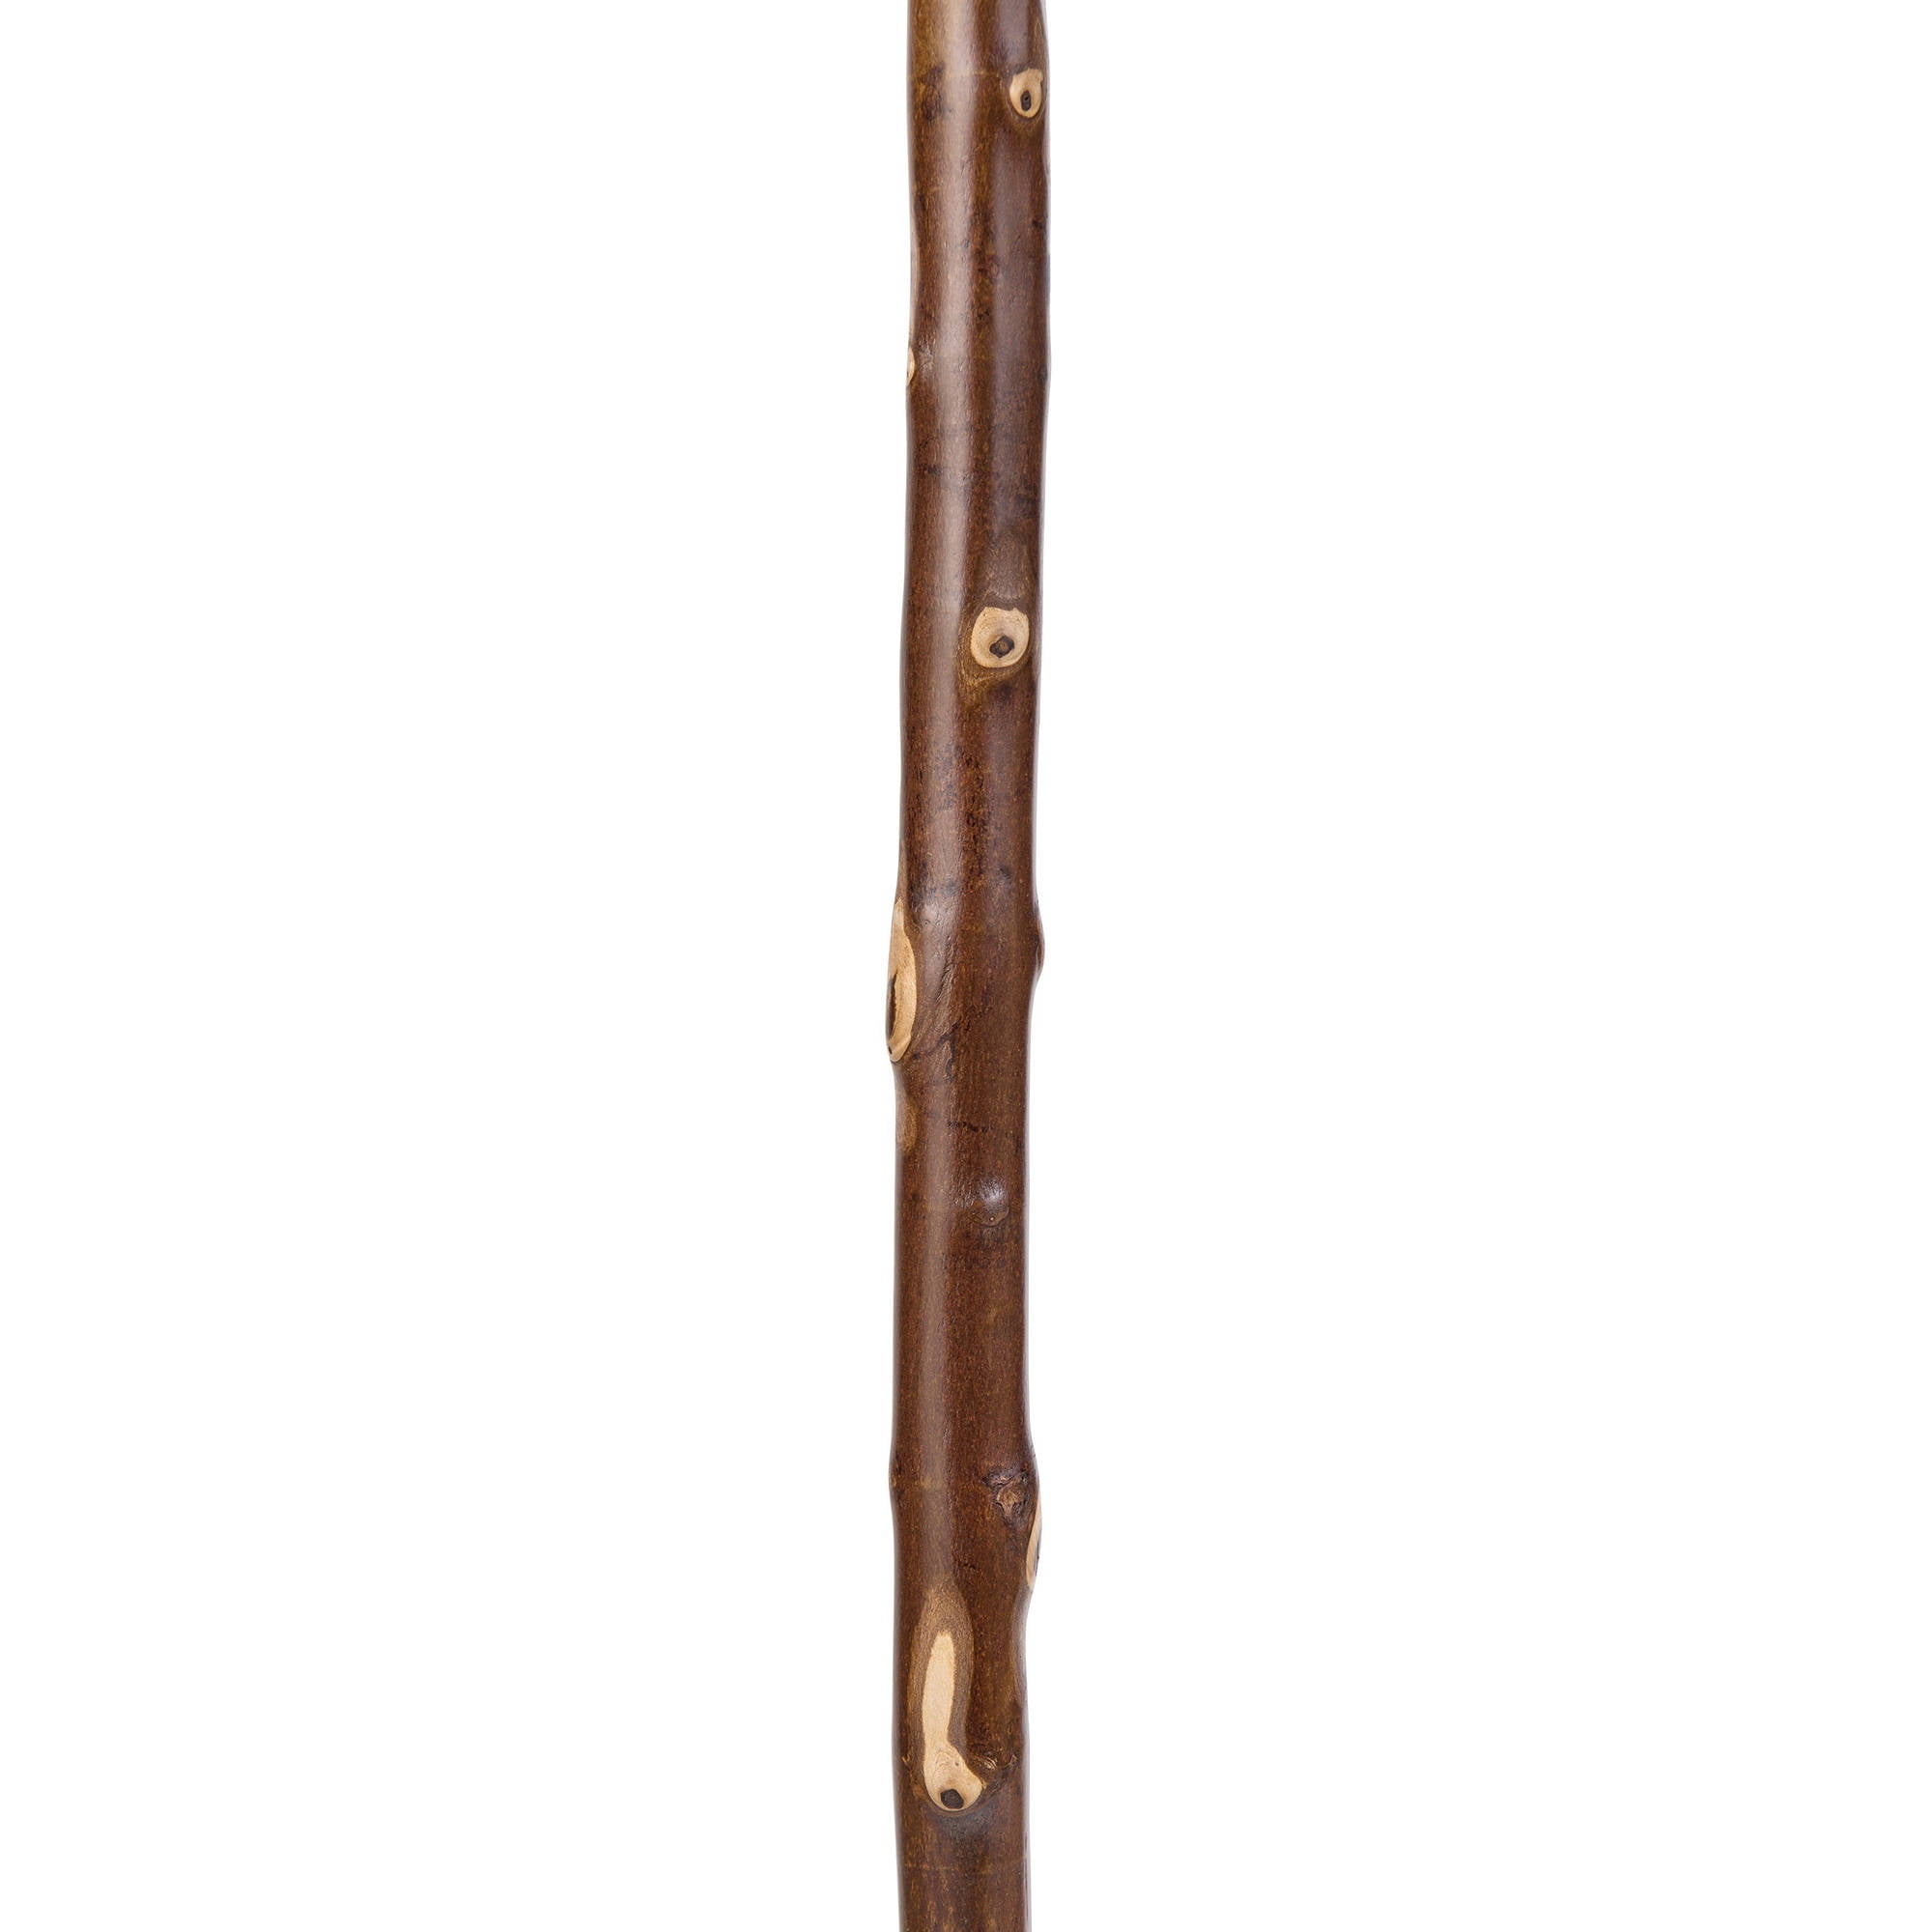 Brazos Rustic Wood Walking Stick, Maple, Traditional Style Handle